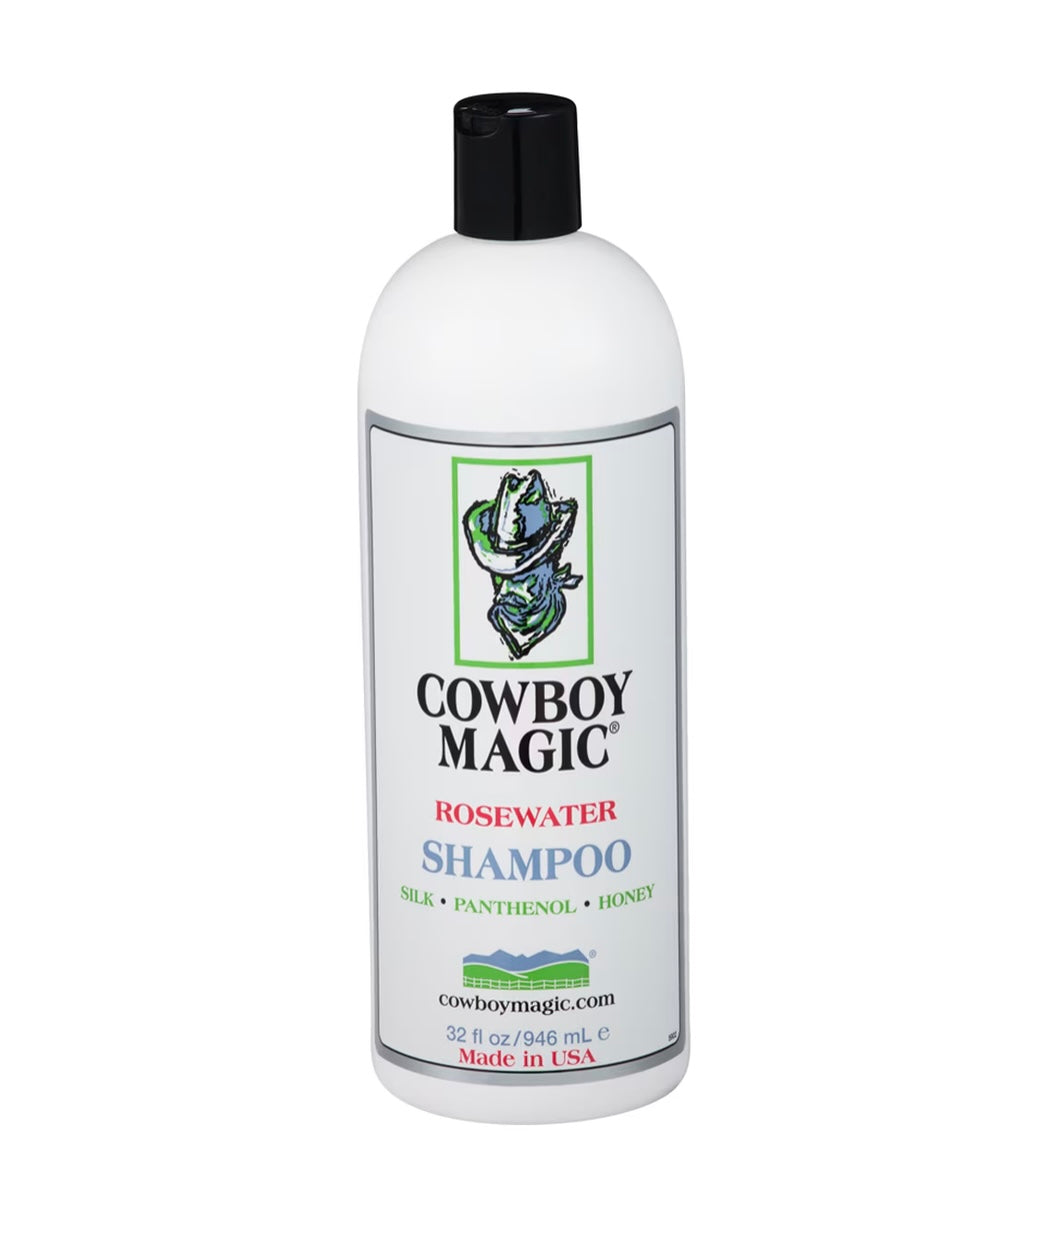 Cowboy Magic Rosewater Shampoo - Equine Grooming Products - Gee Gee Equine